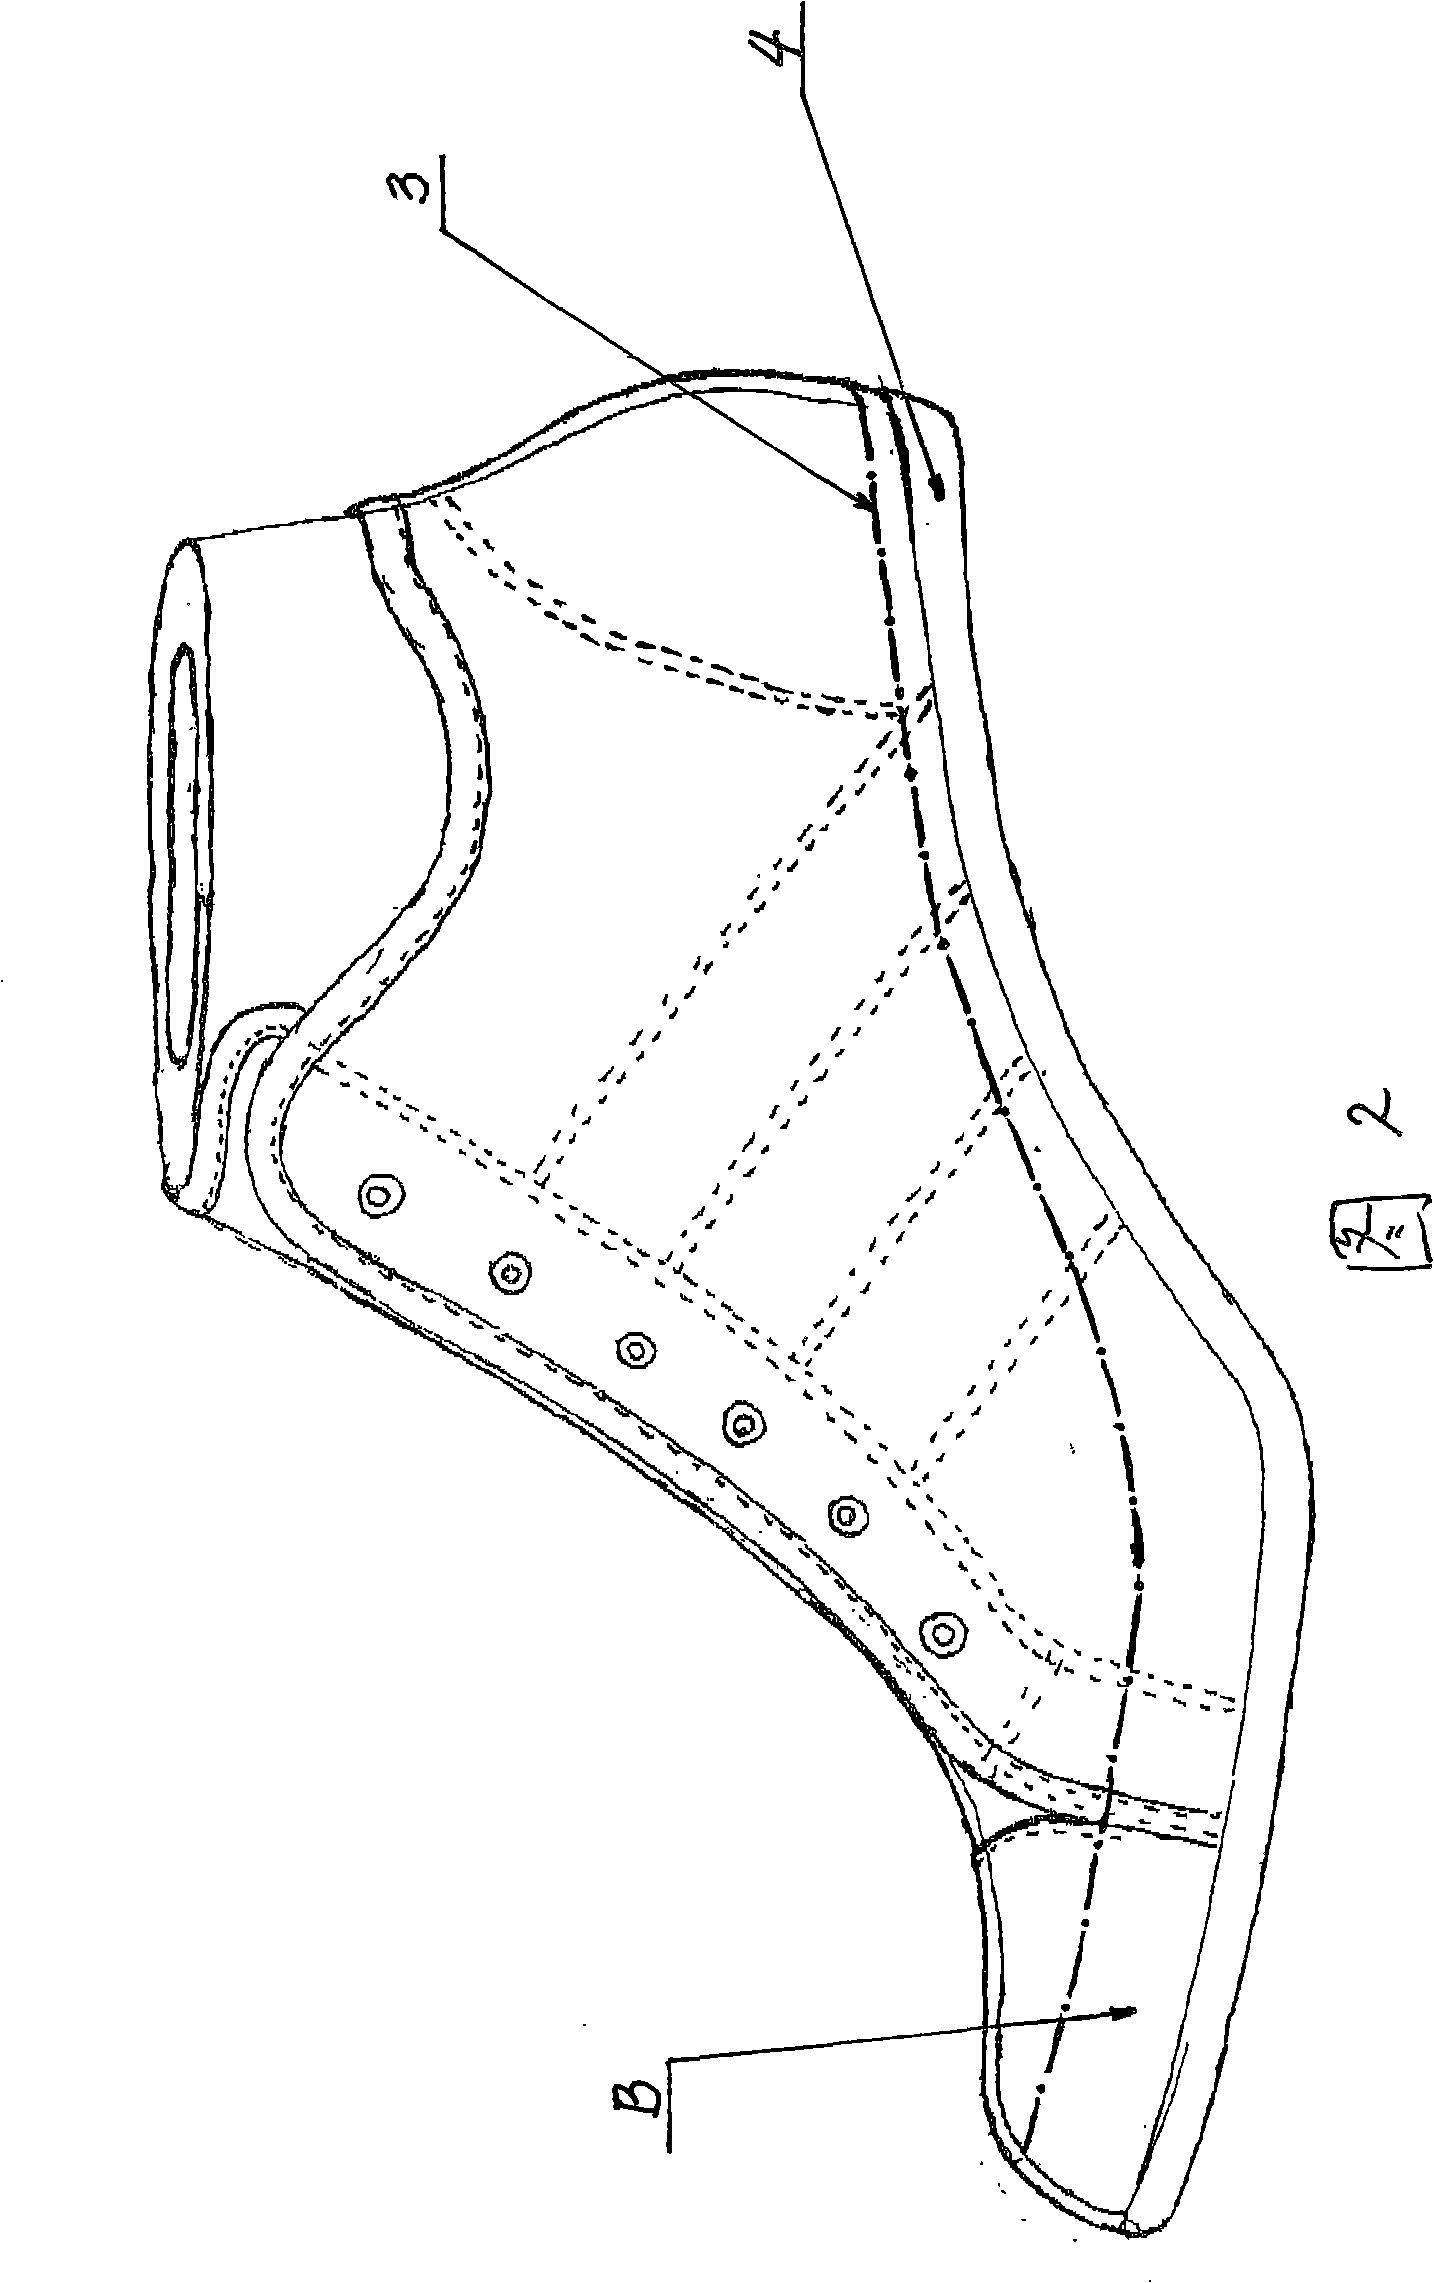 Manufacture method of wedge rubber shoes